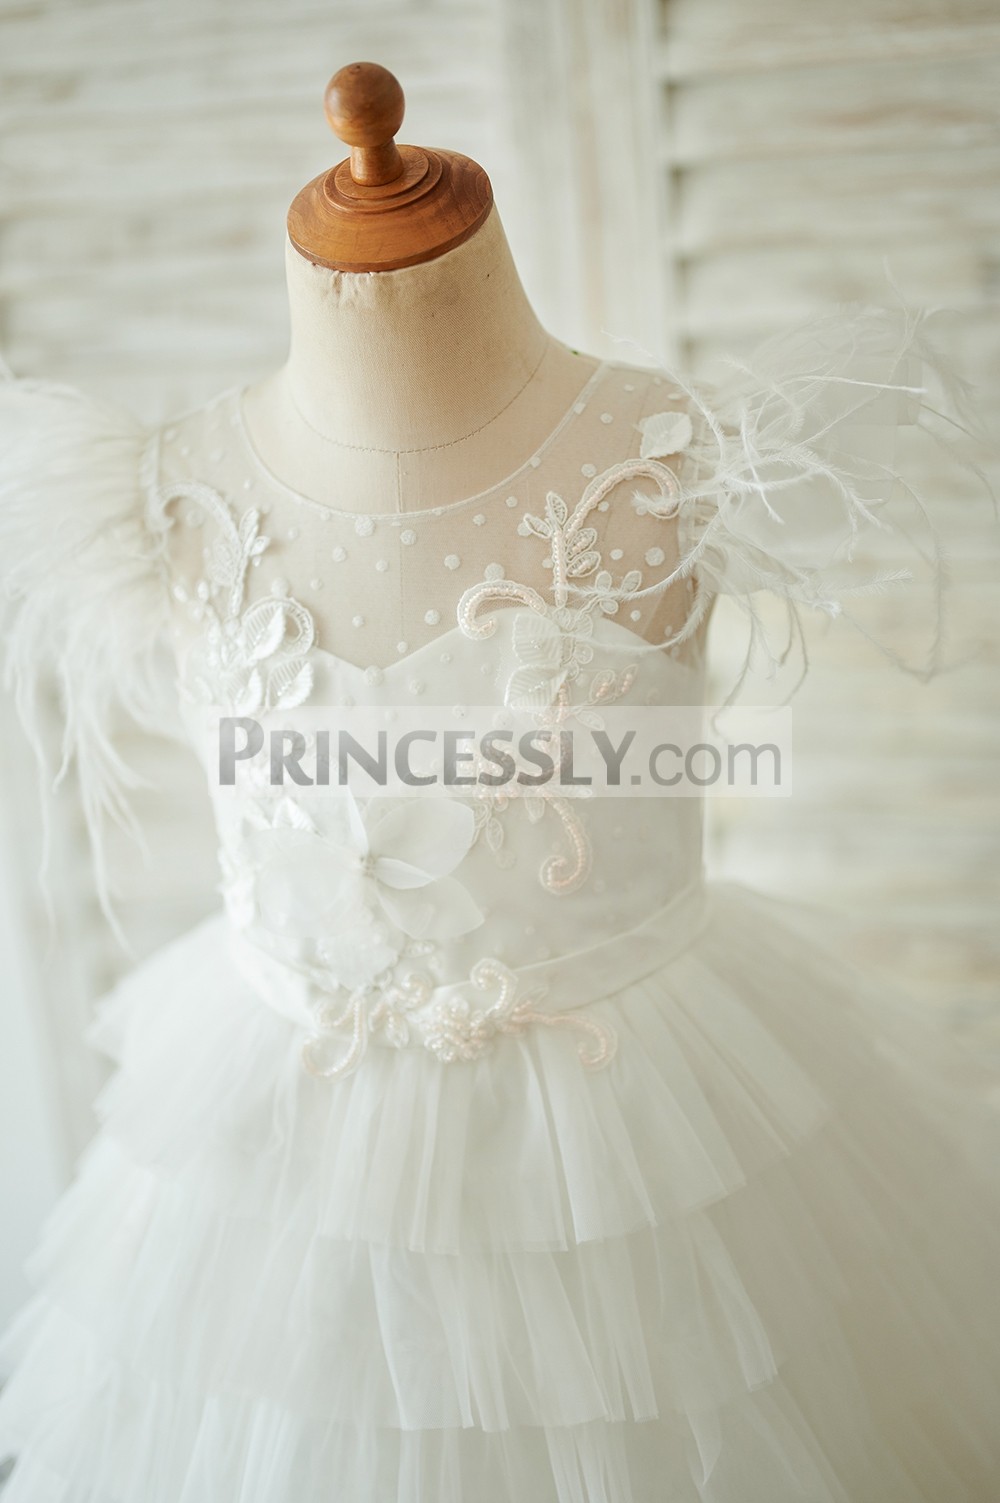 Dot tulle overlay sweetheart lining bodice with feathers cap sleeves